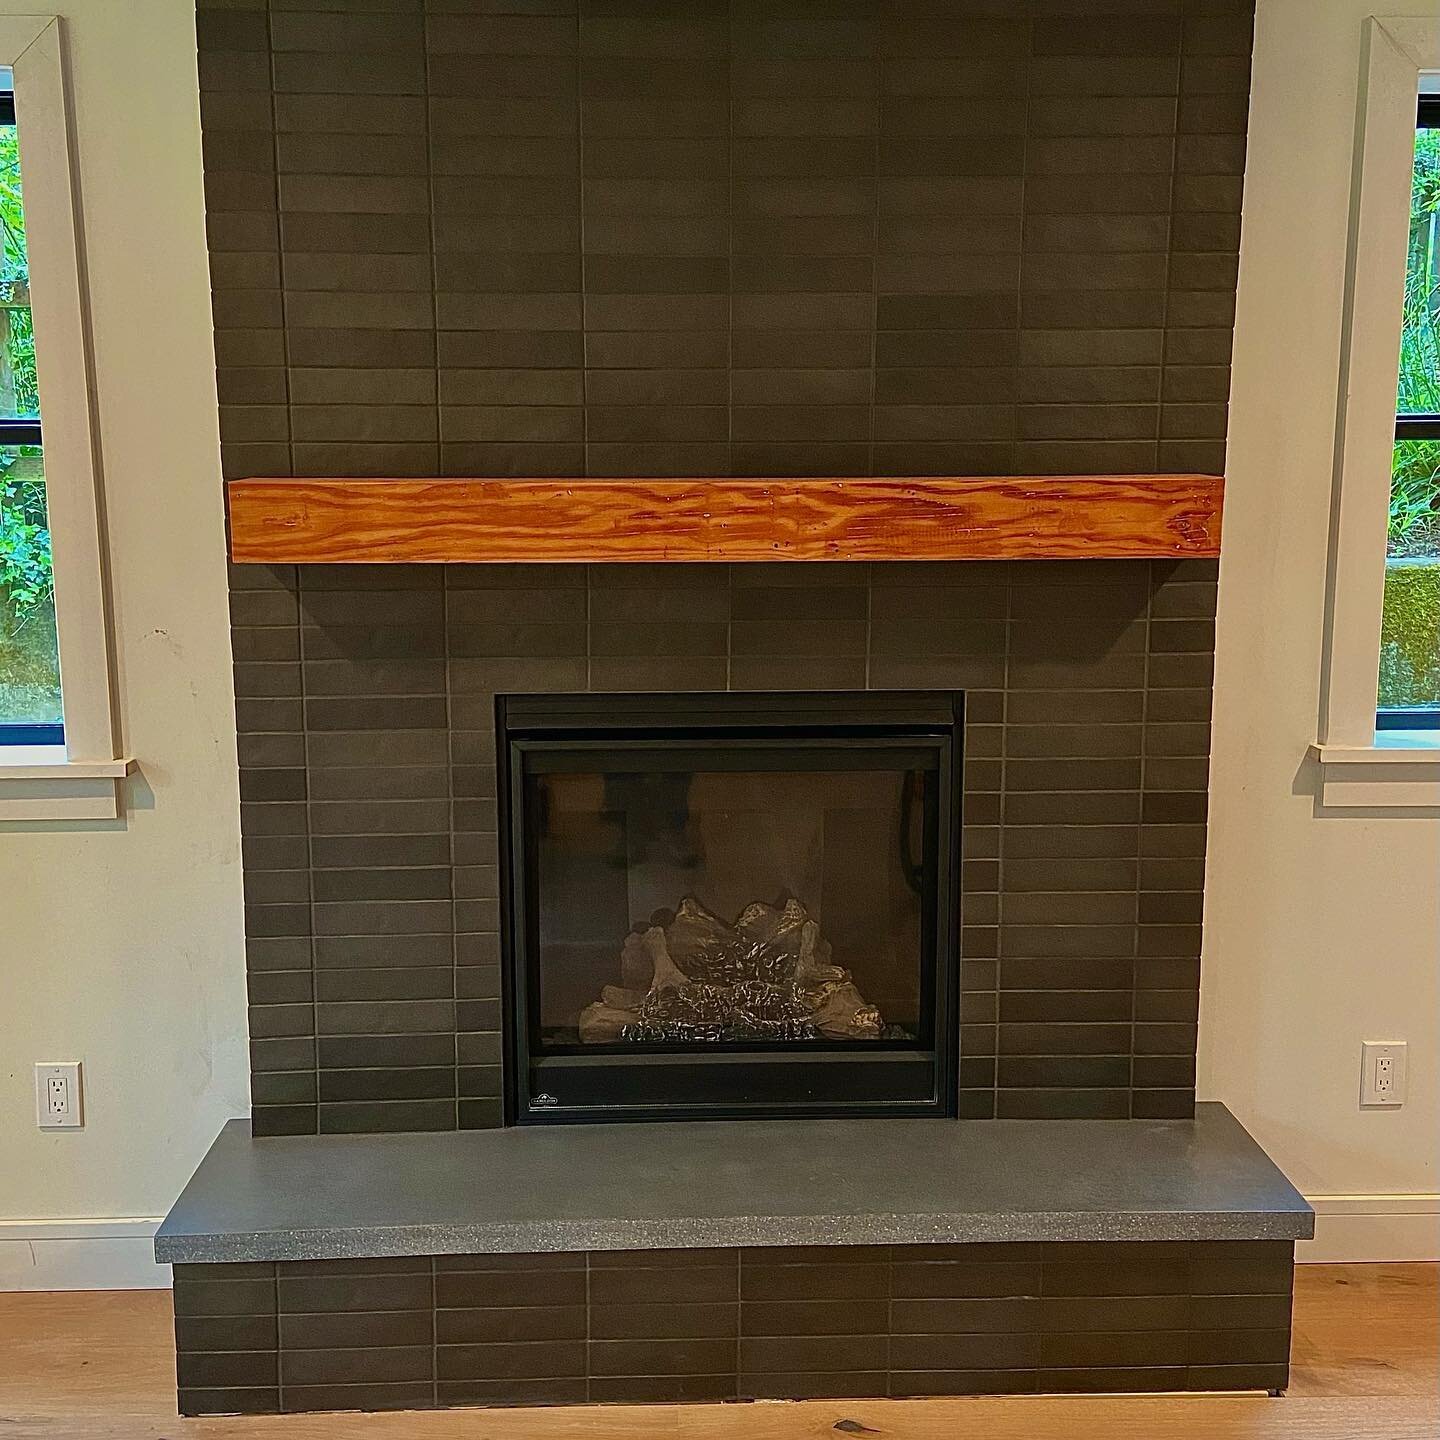 How about that fireplace!  The process of transforming this thing has been really rewarding. From salvaging the beam we removed in the kitchen for the mantel, to pouring the concrete hearth, to setting the tile. When we started we didn&rsquo;t really